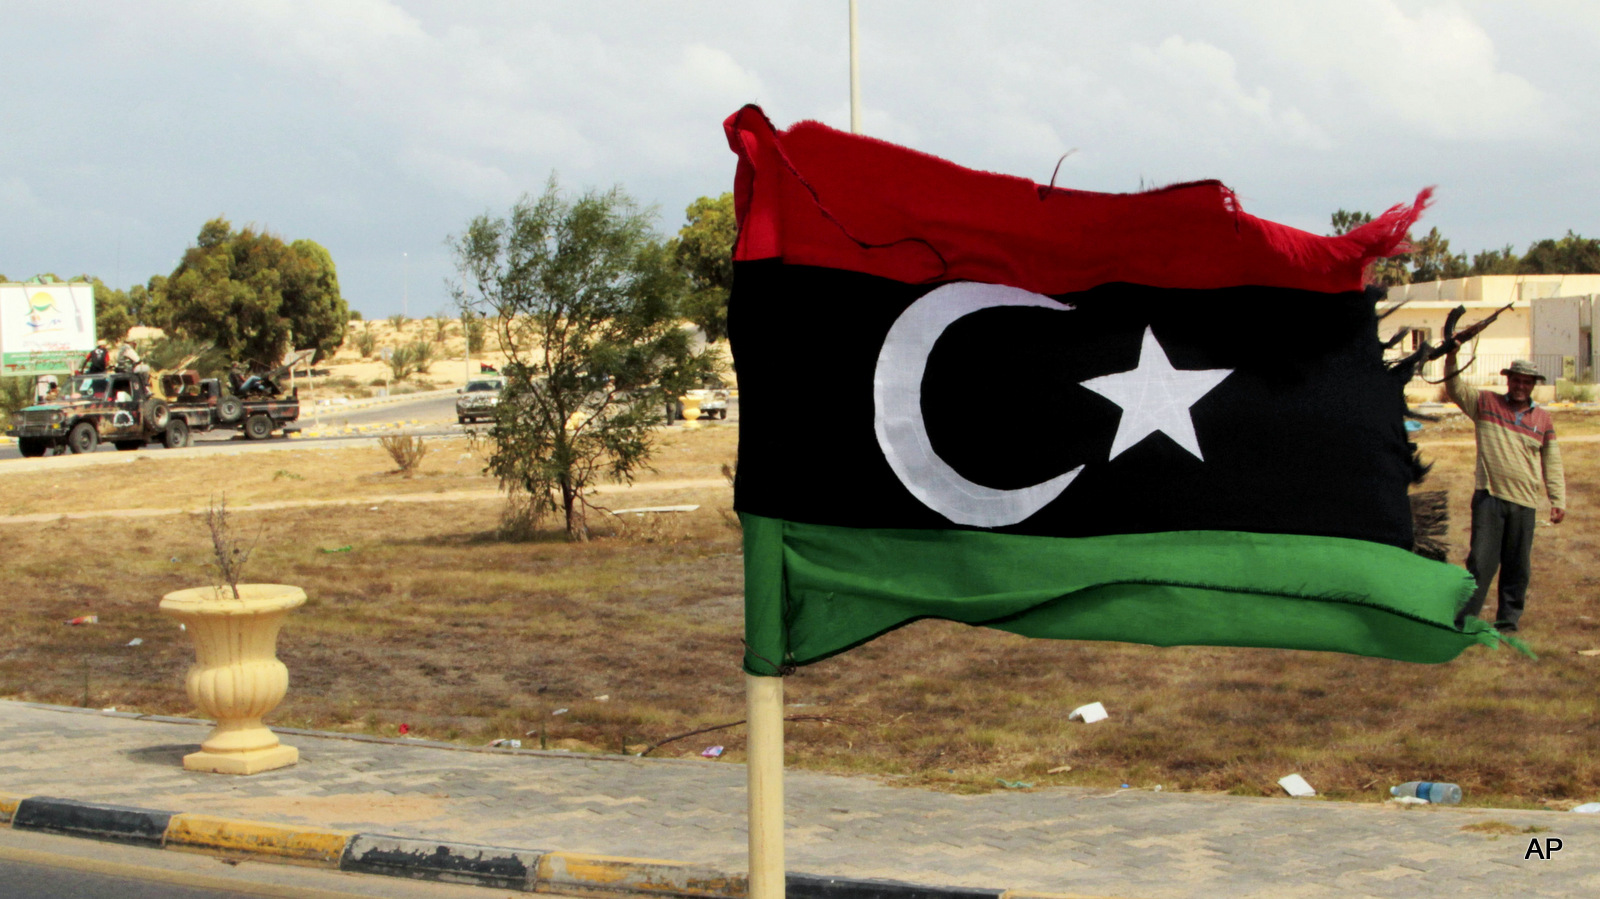 A revolutionary forces commander, Wajdi Badri, right, stands next to a pre-Gadhafi flag as he celebrates the new take over of the western main square in Sirte, Libya, Thursday, Sept. 22, 2011.  The general commanding NATO's mission in Libya said at the time that isolated groups of forces loyal to ousted strongman Moammar Gadhafi continud to be a threat to local people would be unable to coordinate their actions.